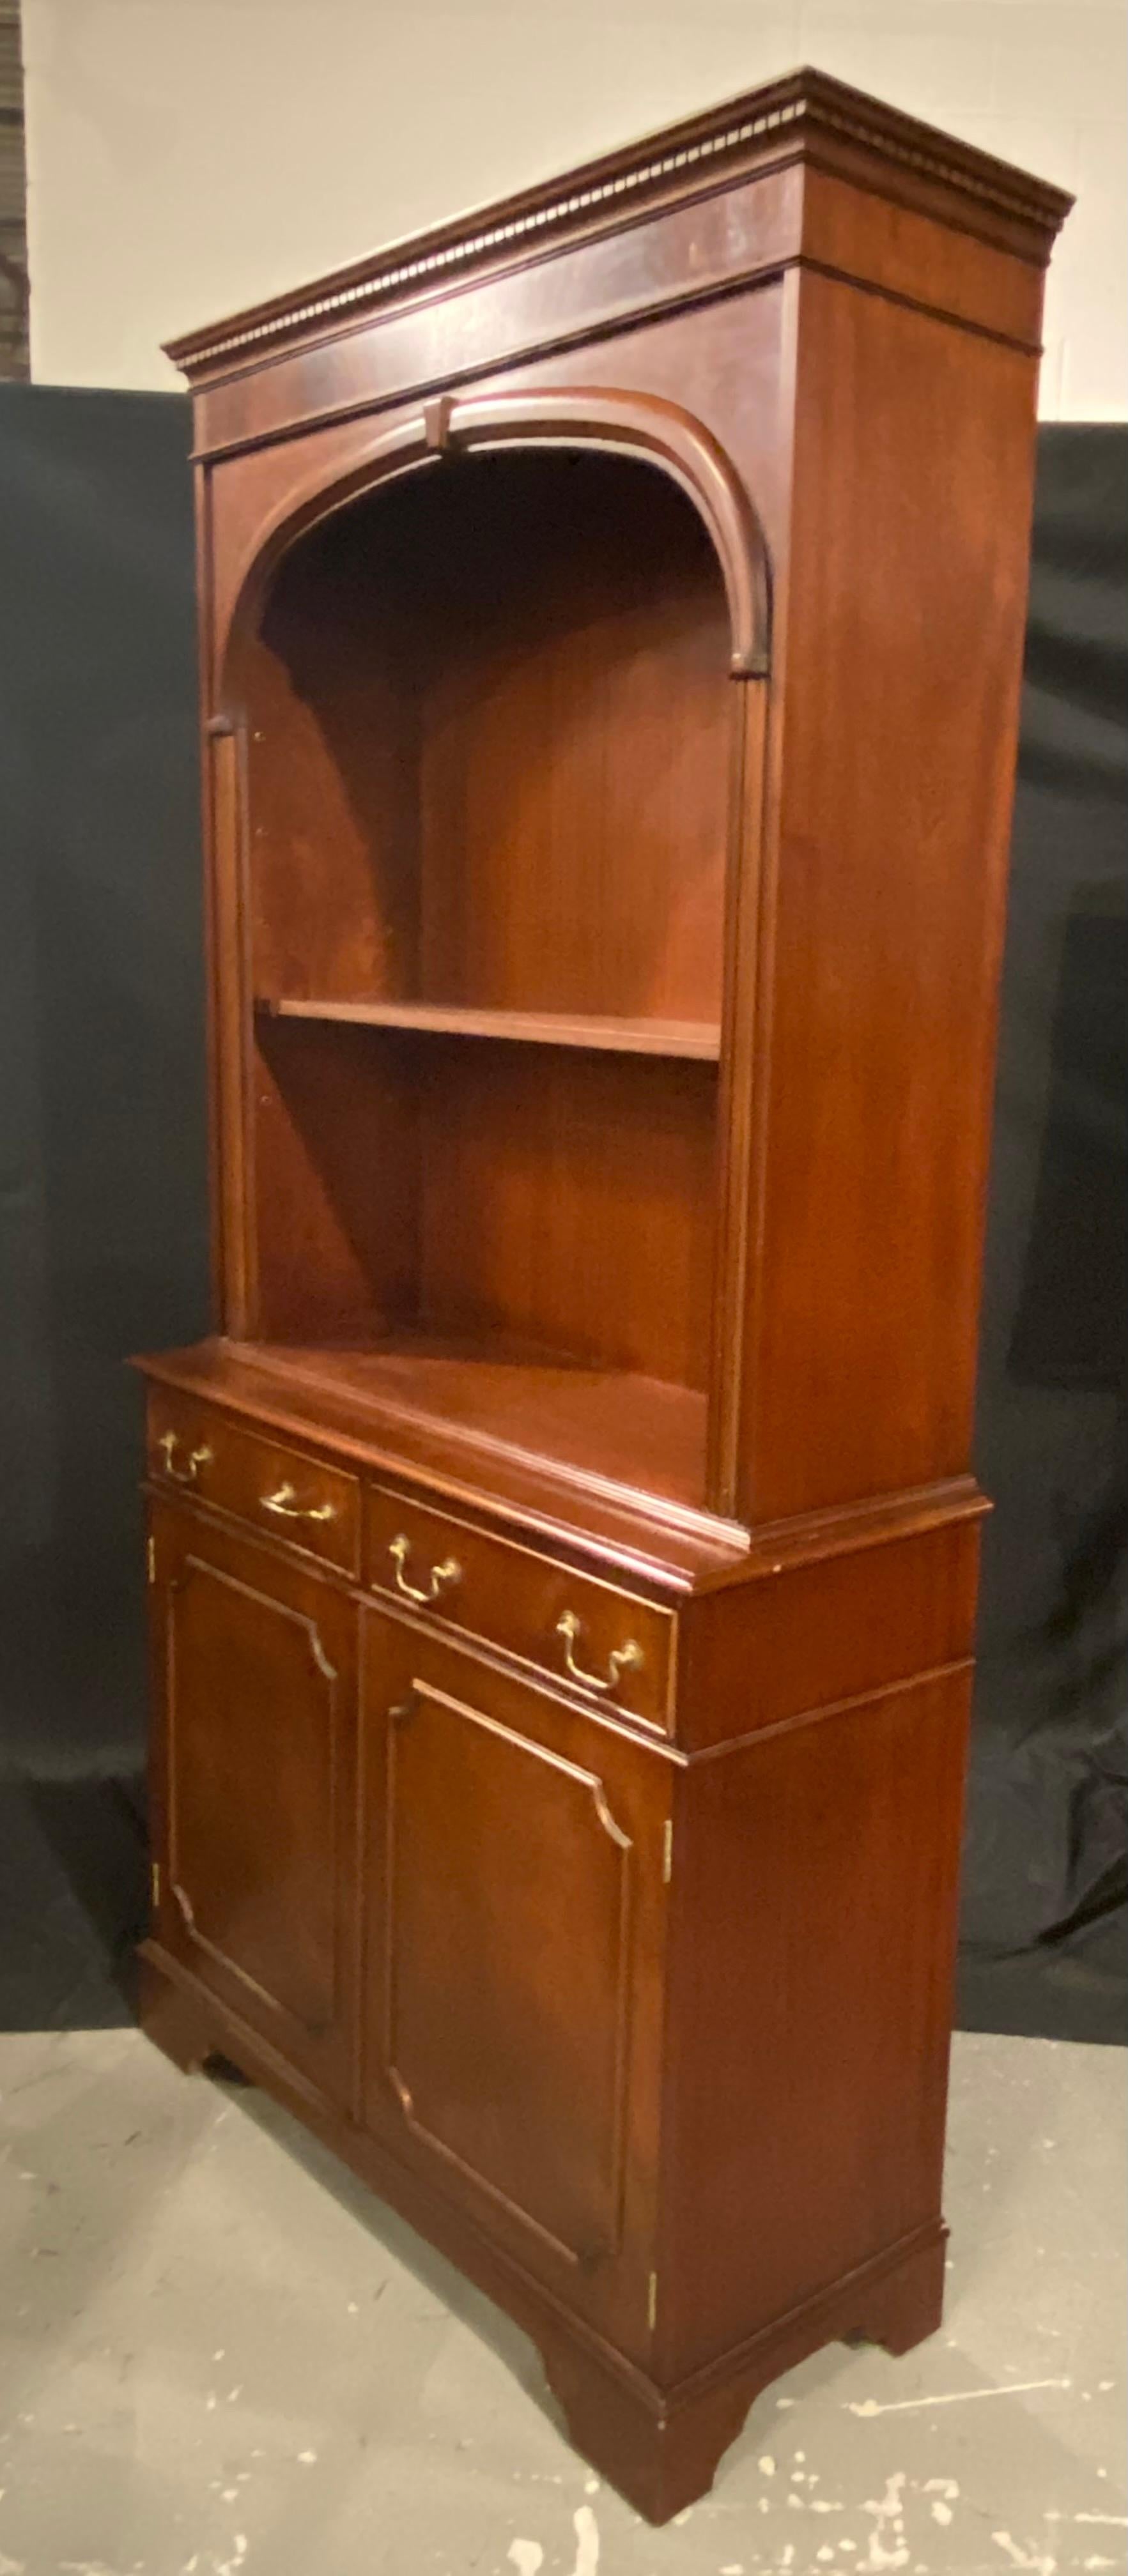 A traditional English bookcase in the Georgian styling, with a Classic arch in the top of the bookcase shelf area. The cabinet is in two pieces top and bottom with the booth being server type cabinet.